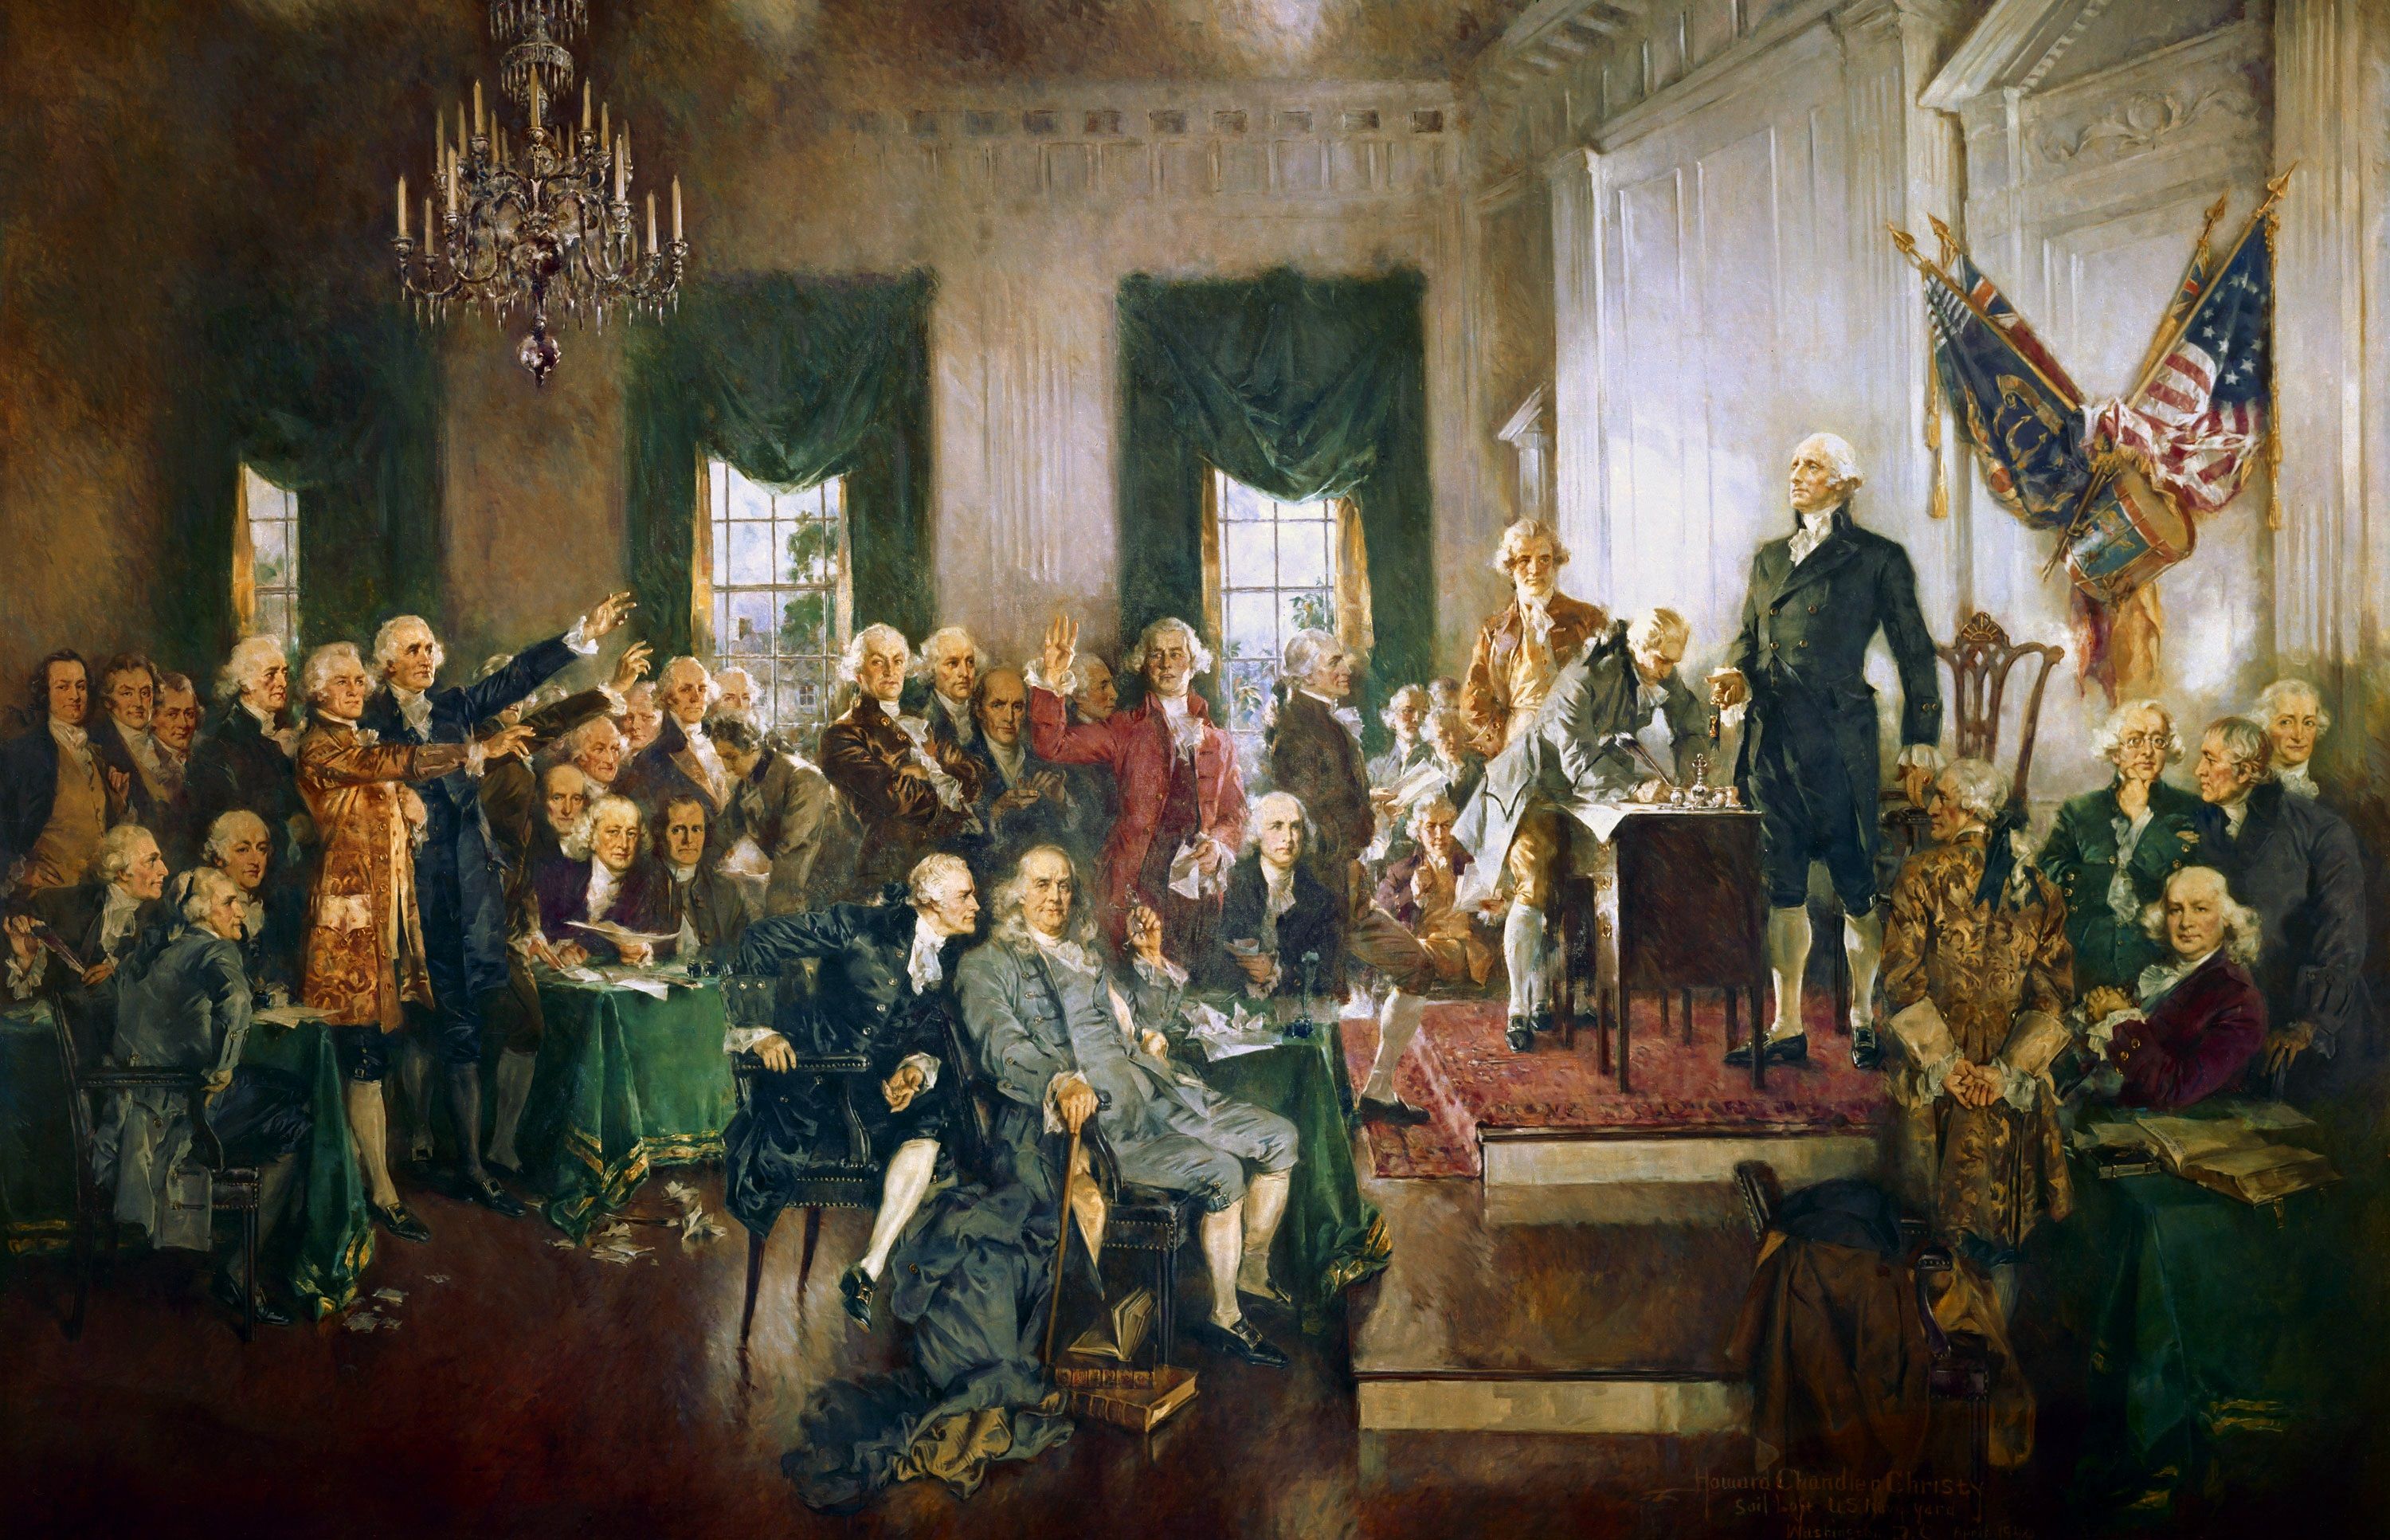 Scene_at_the_Signing_of_the_Constitution_of_the_United_States.jpg